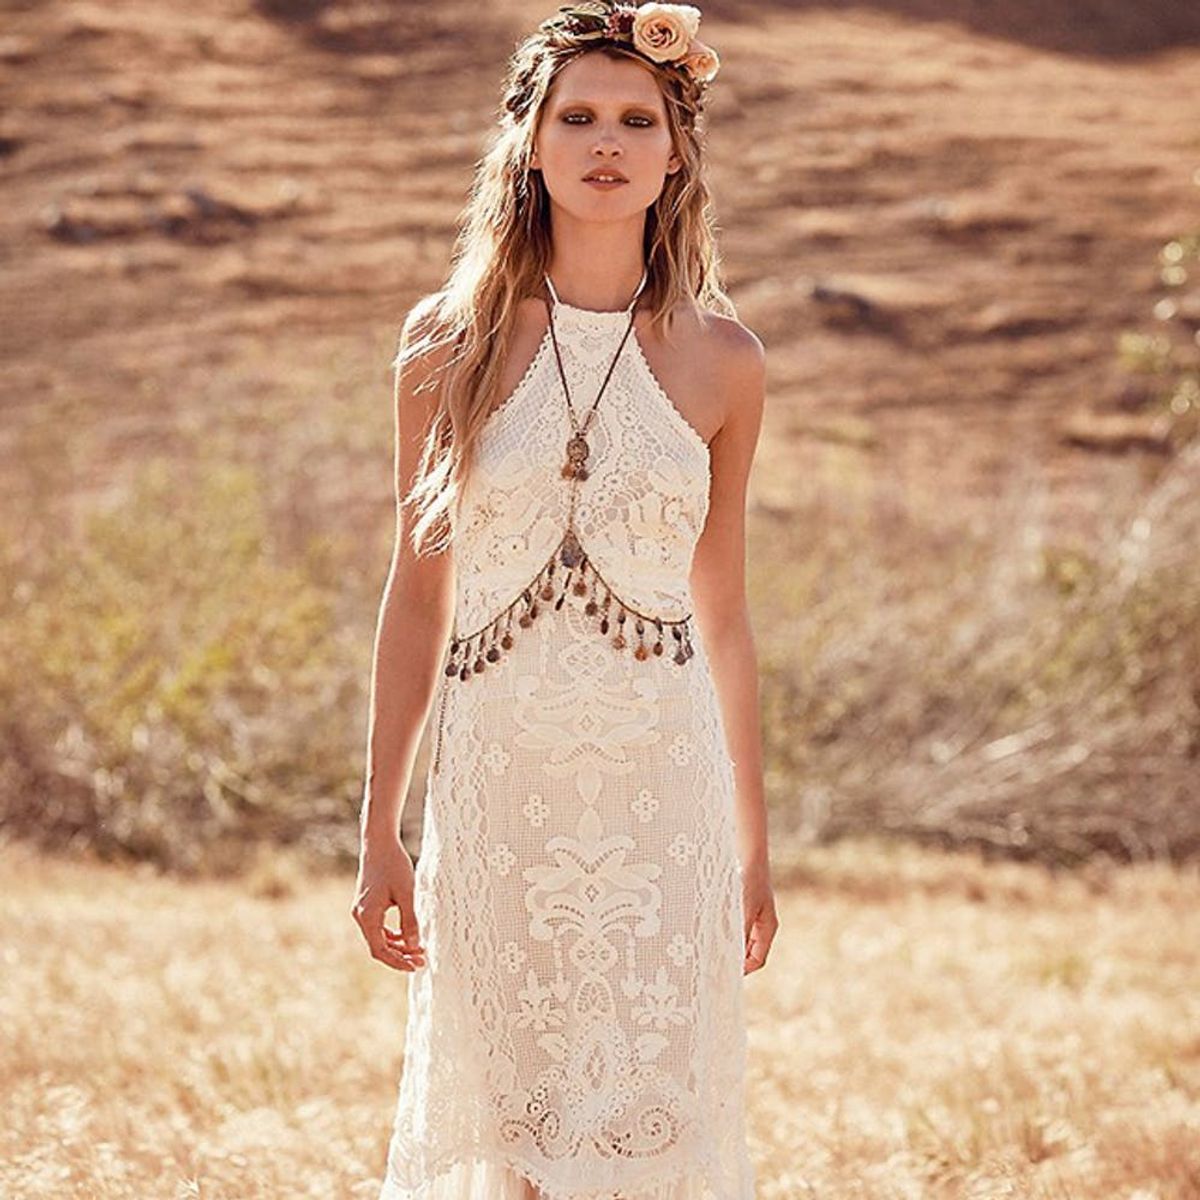 Free People’s New Wedding Line Is Every Boho Bride’s Dream Come True